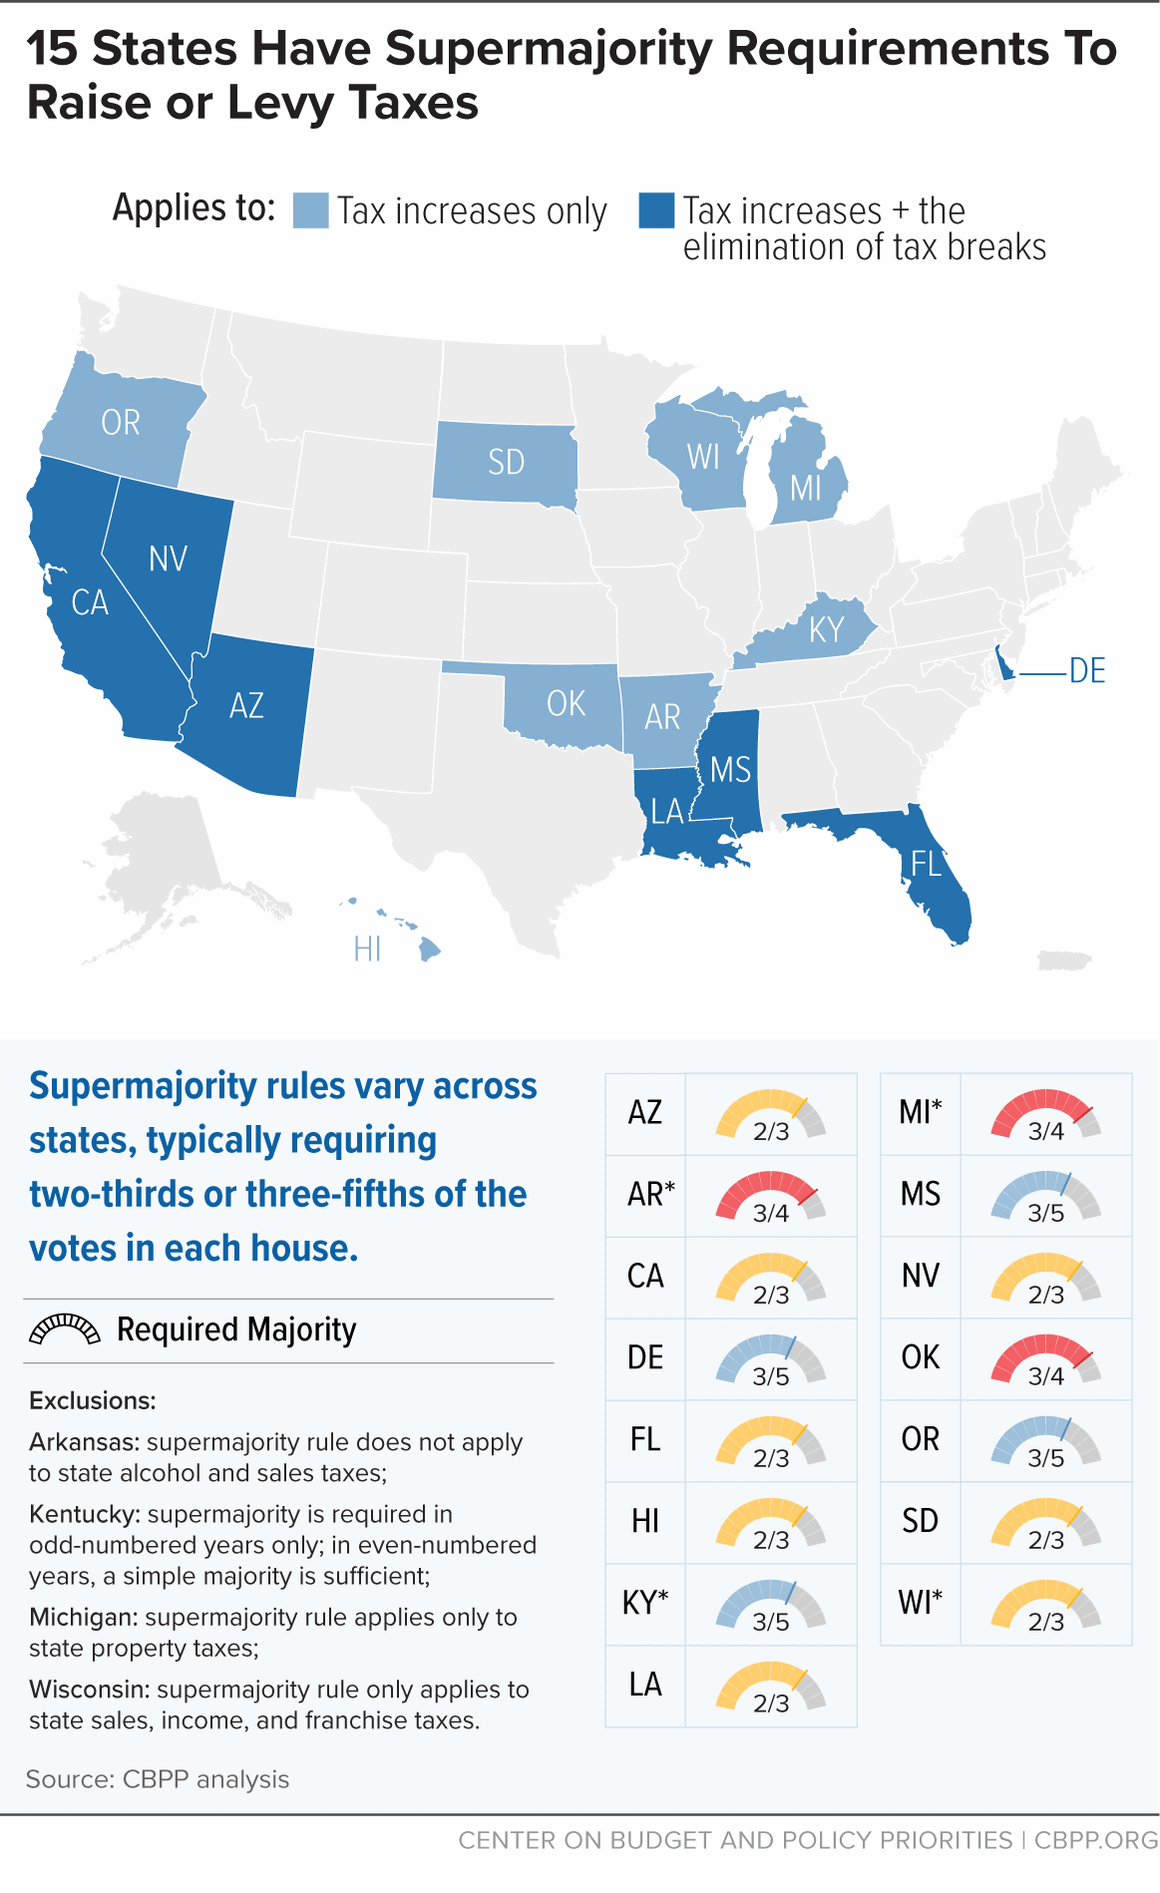 16 States Have Supermajority Requirements To Raise or Levy Taxes